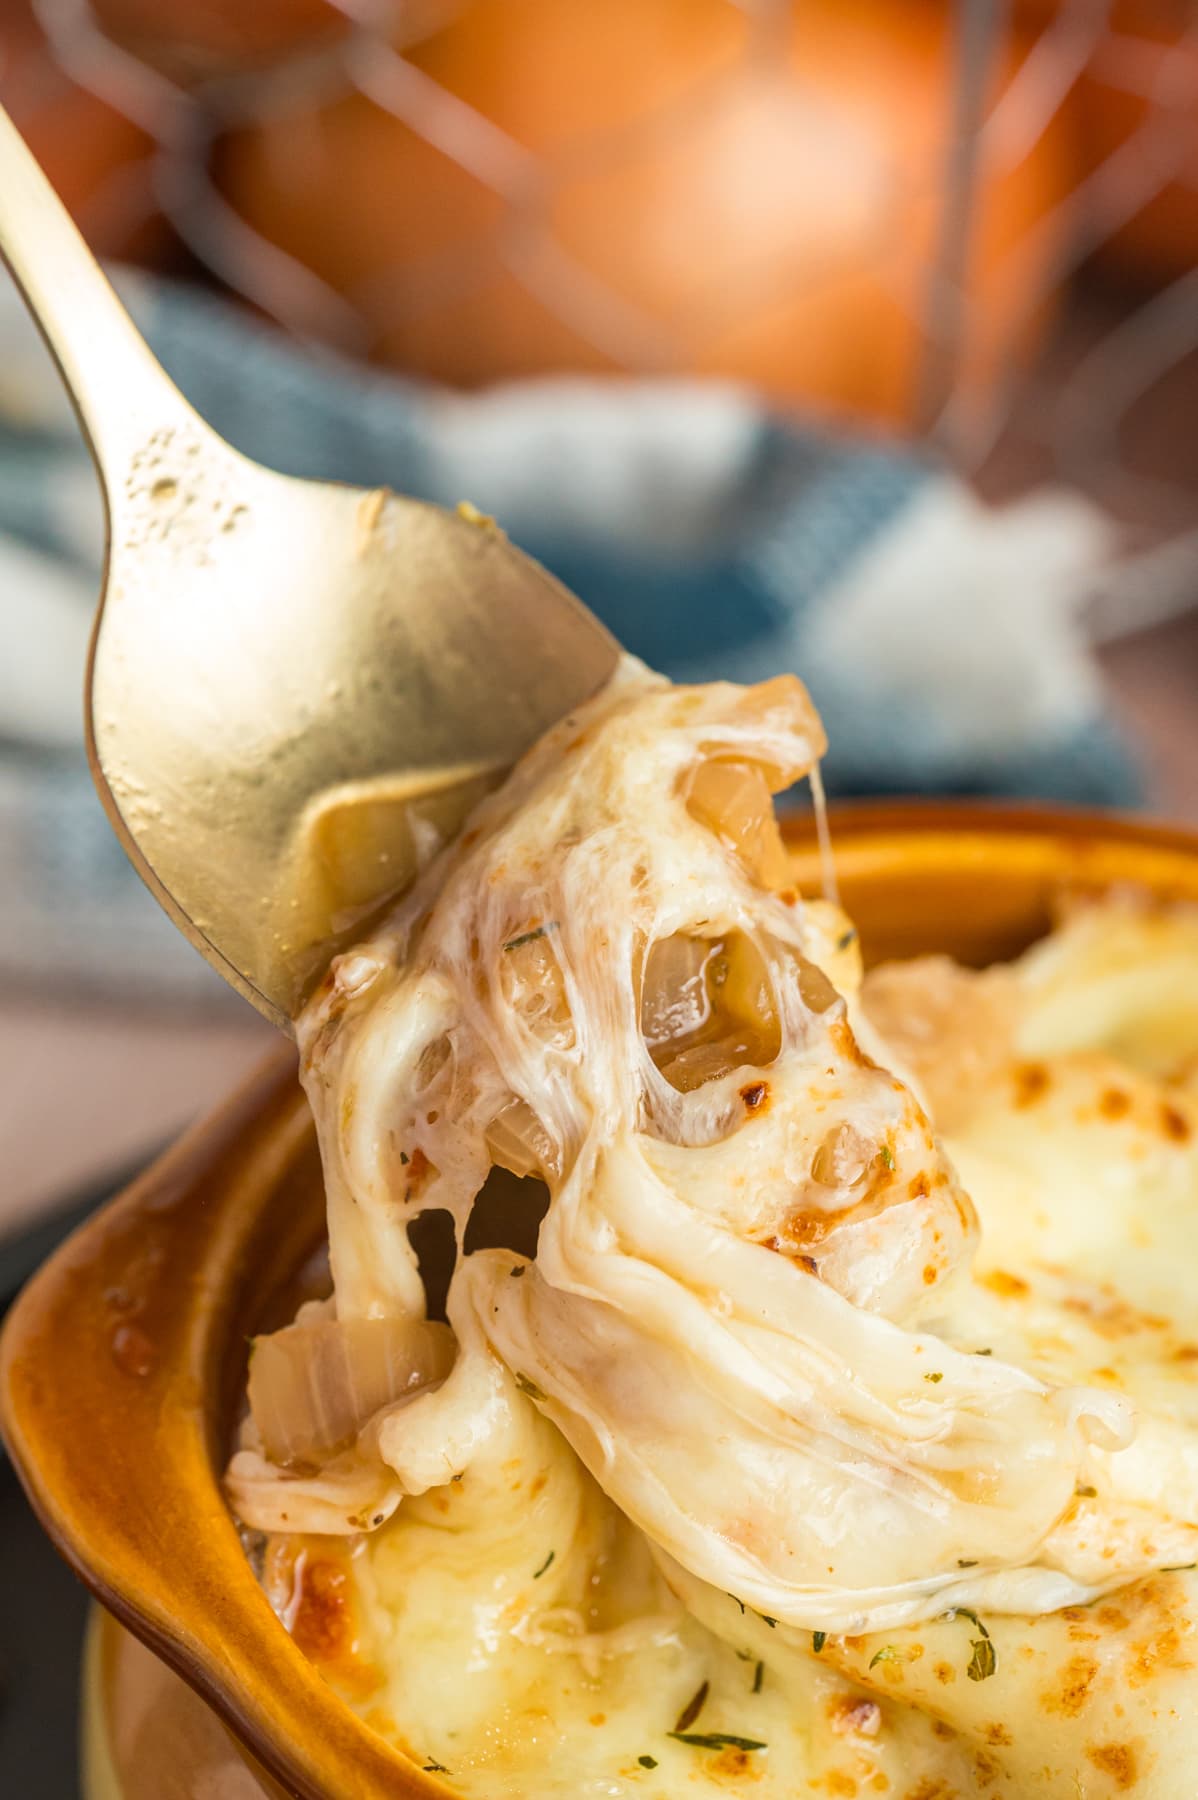 A spoon in a bowl of French onion soup